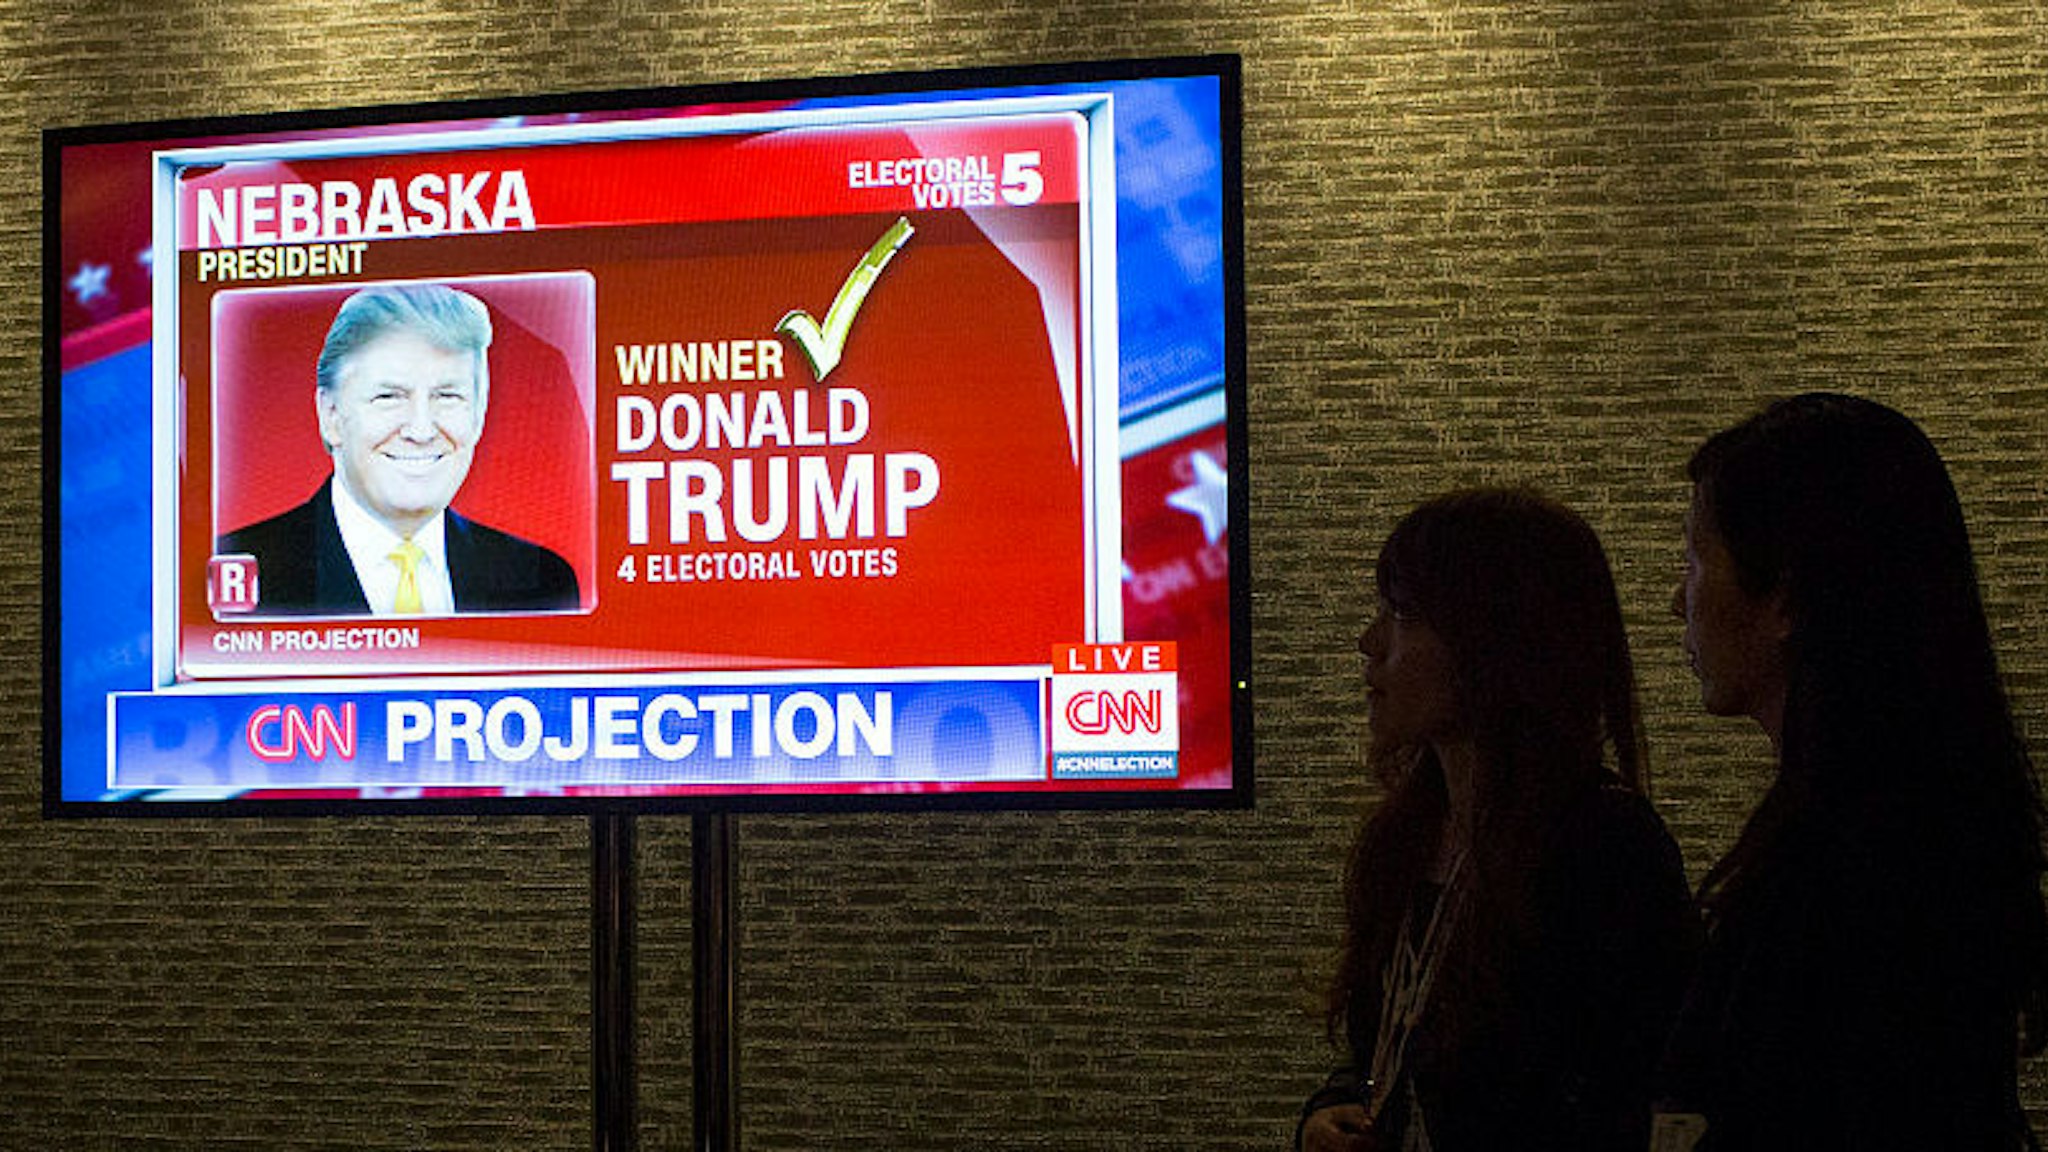 Two Japanese journalists watch the television screen image of Donald J Trump appears on a CNN program after the Republican party presidential nominee wins the vote from the state of Nebraska November 9, 2016 at the Hilton Hotel in New York City. (Photo by Robert Nickelsberg/Getty Images)